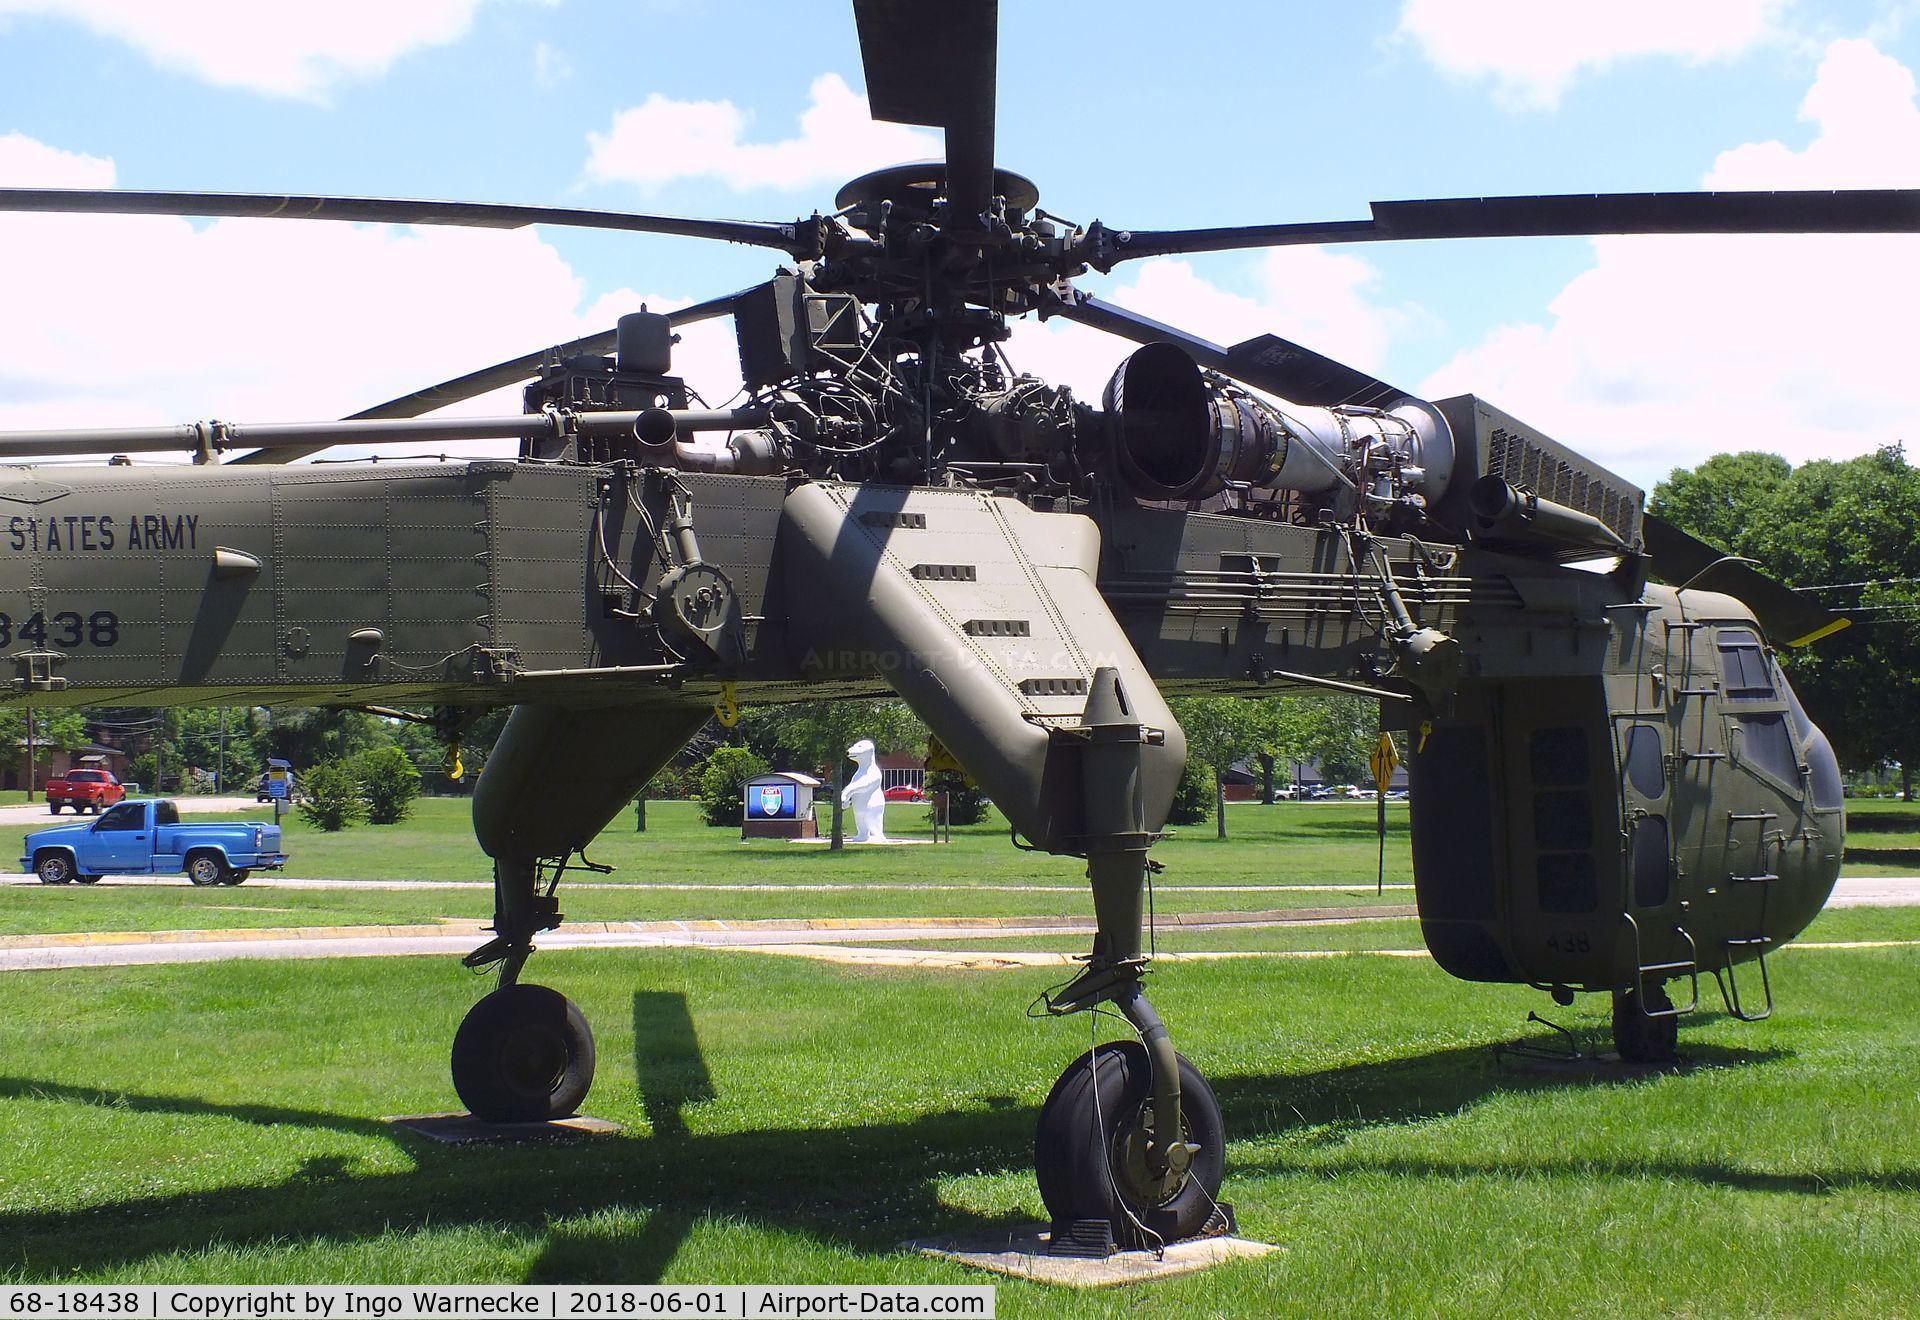 68-18438, 1968 Sikorsky CH-54A Tarhe C/N 64.040, Sikorsky CH-54A Tarhe at the US Army Aviation Museum, Ft. Rucker